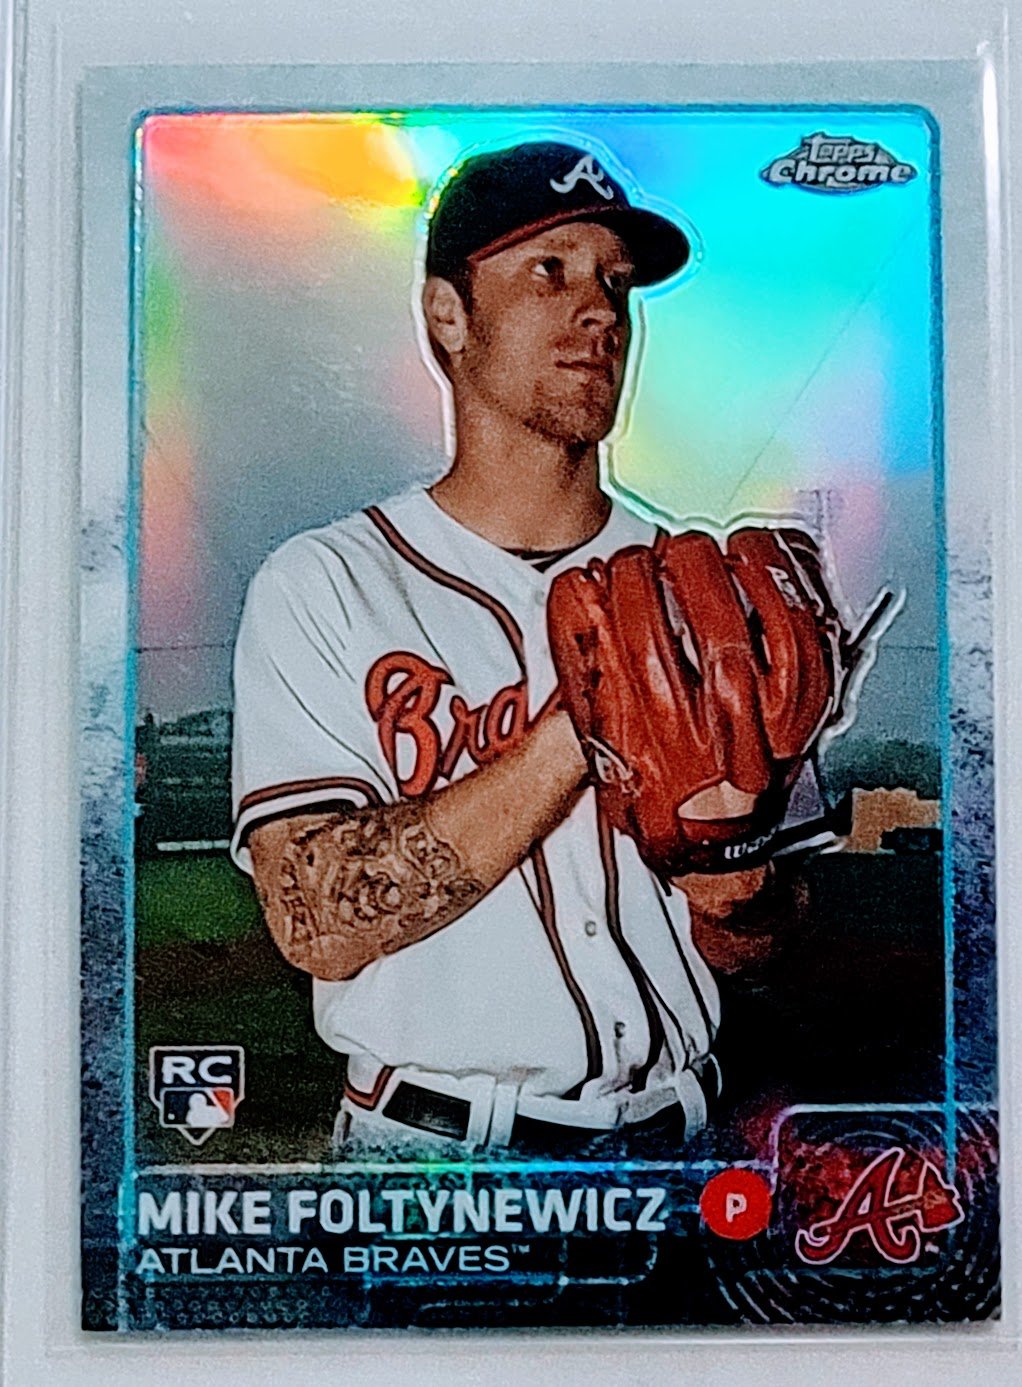 2015 Topps Chrome Mike Foltynewicz Rookie Refractor Baseball Card TPTV simple Xclusive Collectibles   